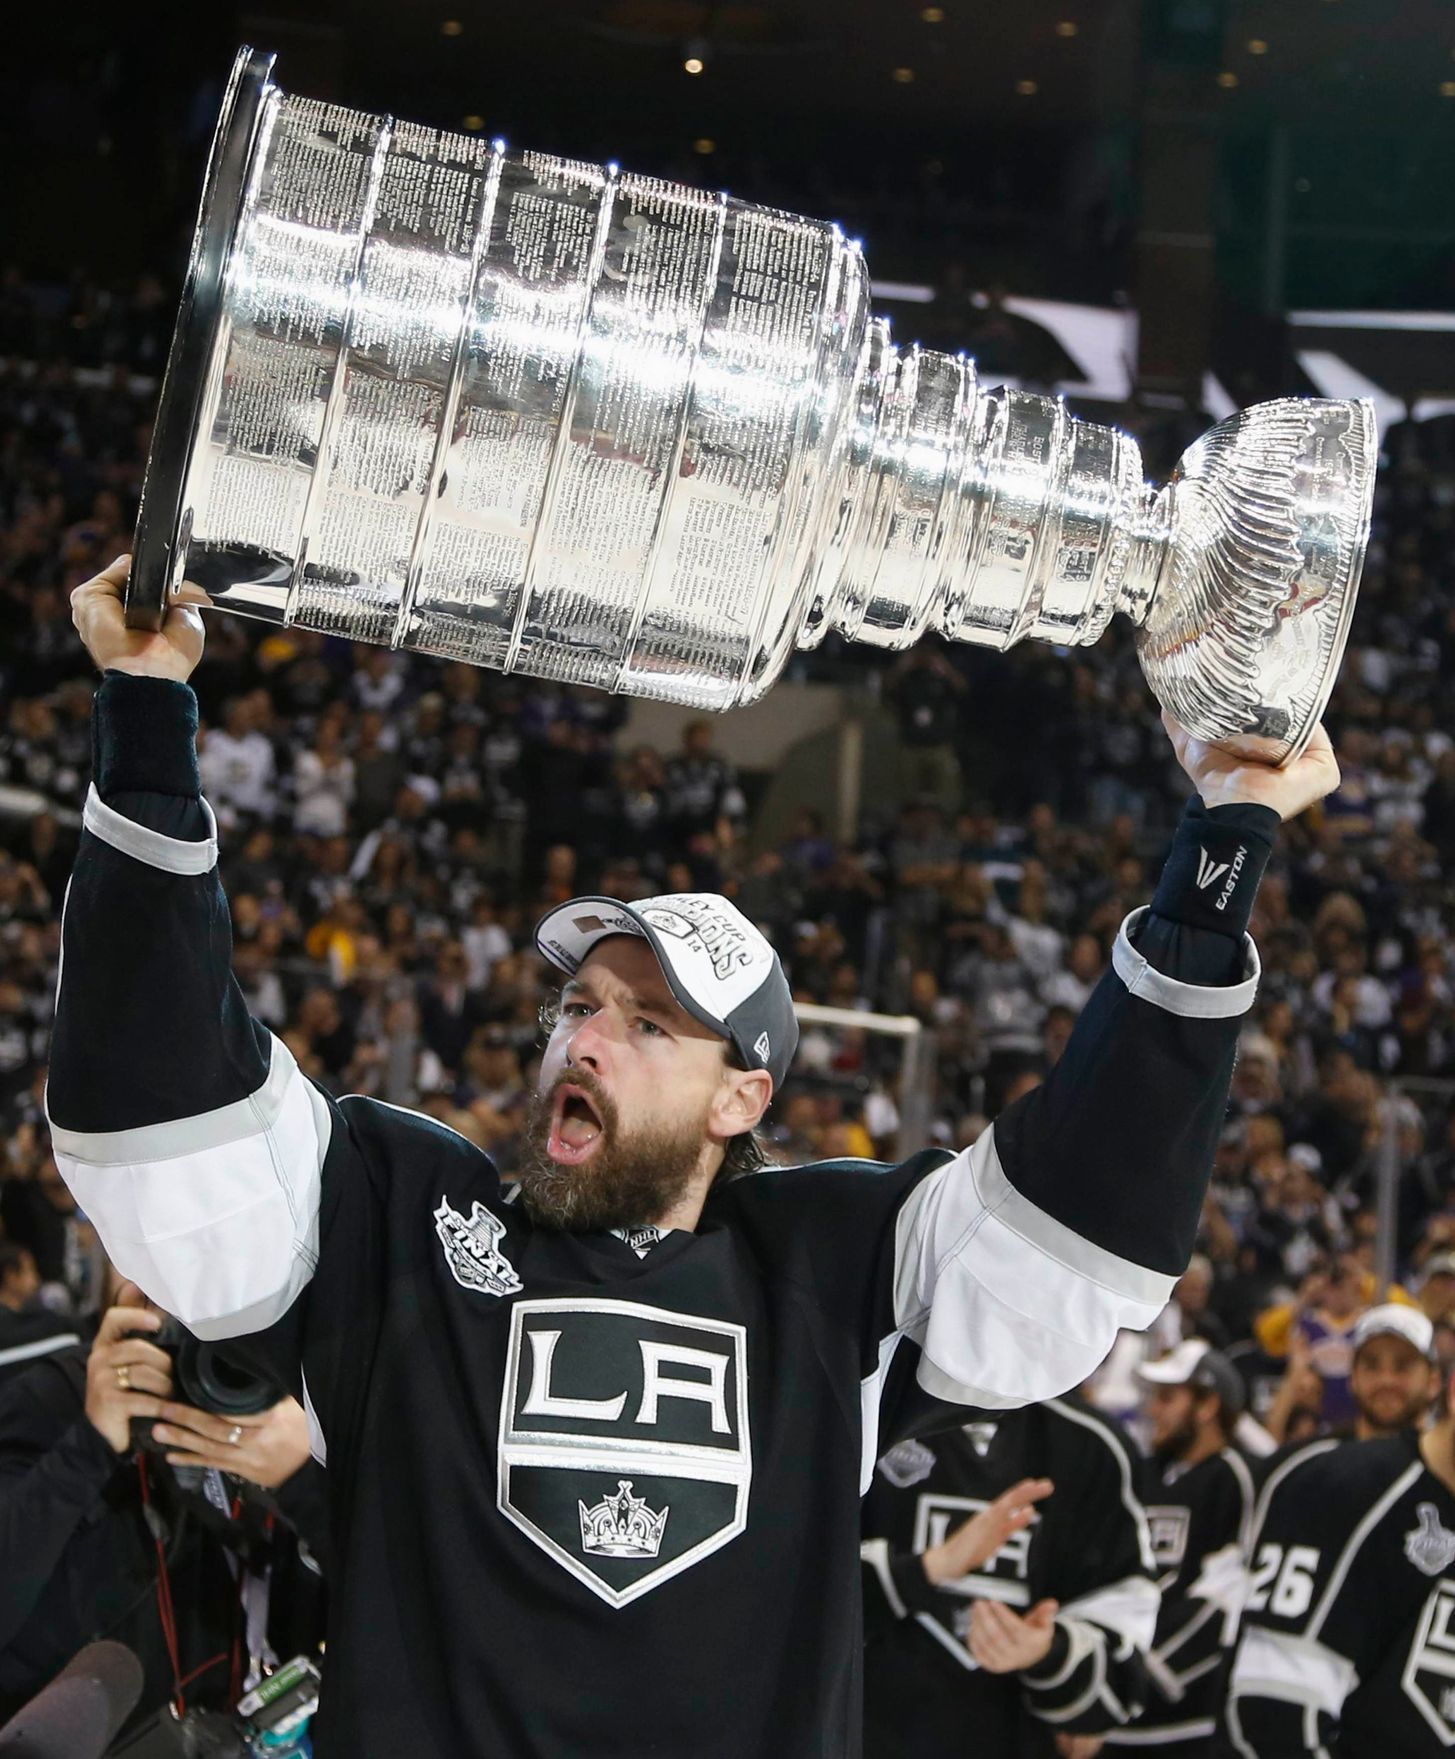 Los Angeles Kings' Justin Williams celebrates with the Stanley Cup after NHL Stanley Cup Finals in Los Angeles